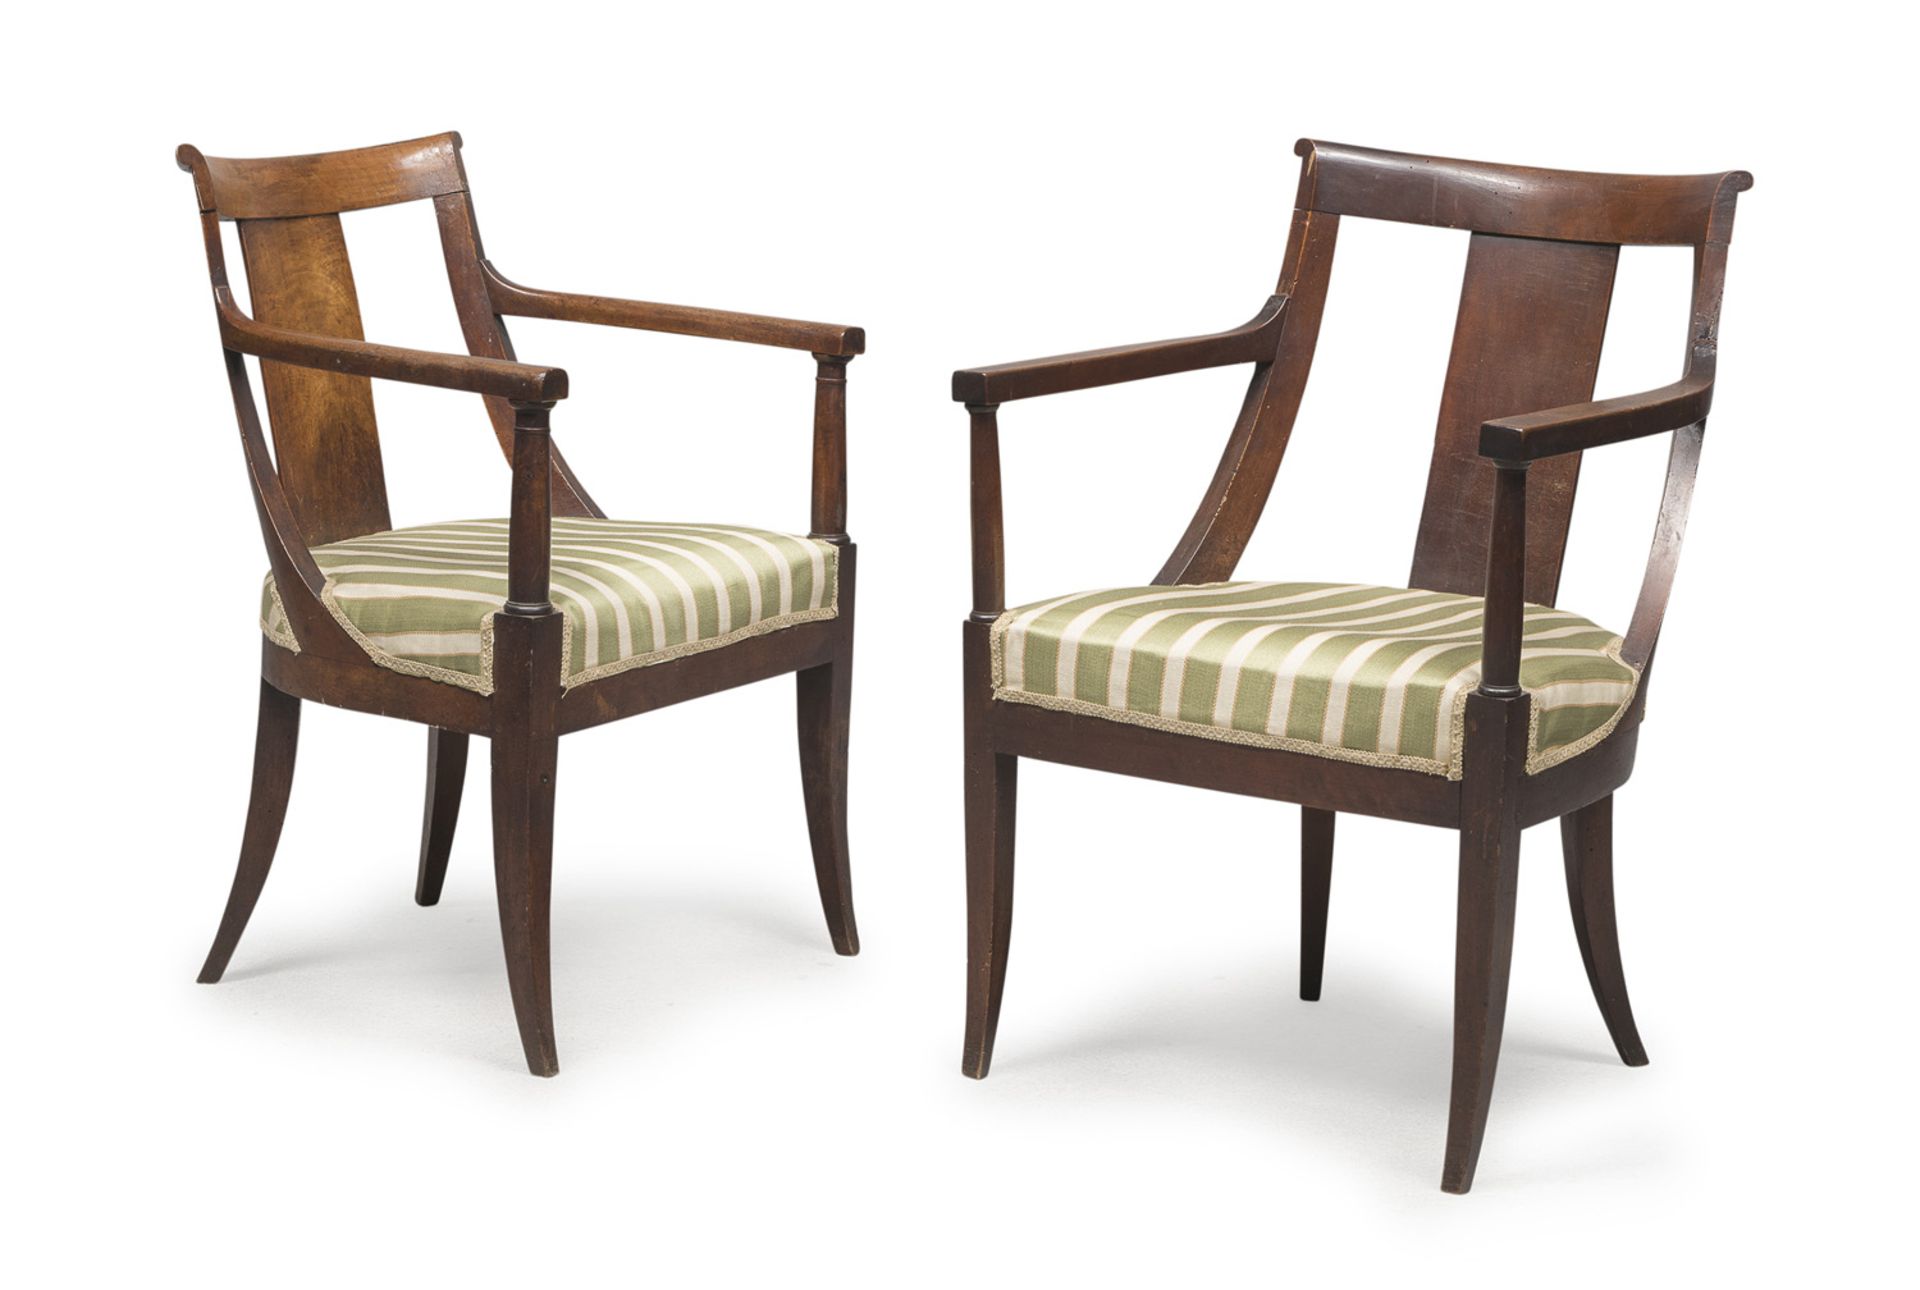 PAIR OF MAHOGANY ARMCHAIRS FRANCE DIRECTORY PERIOD